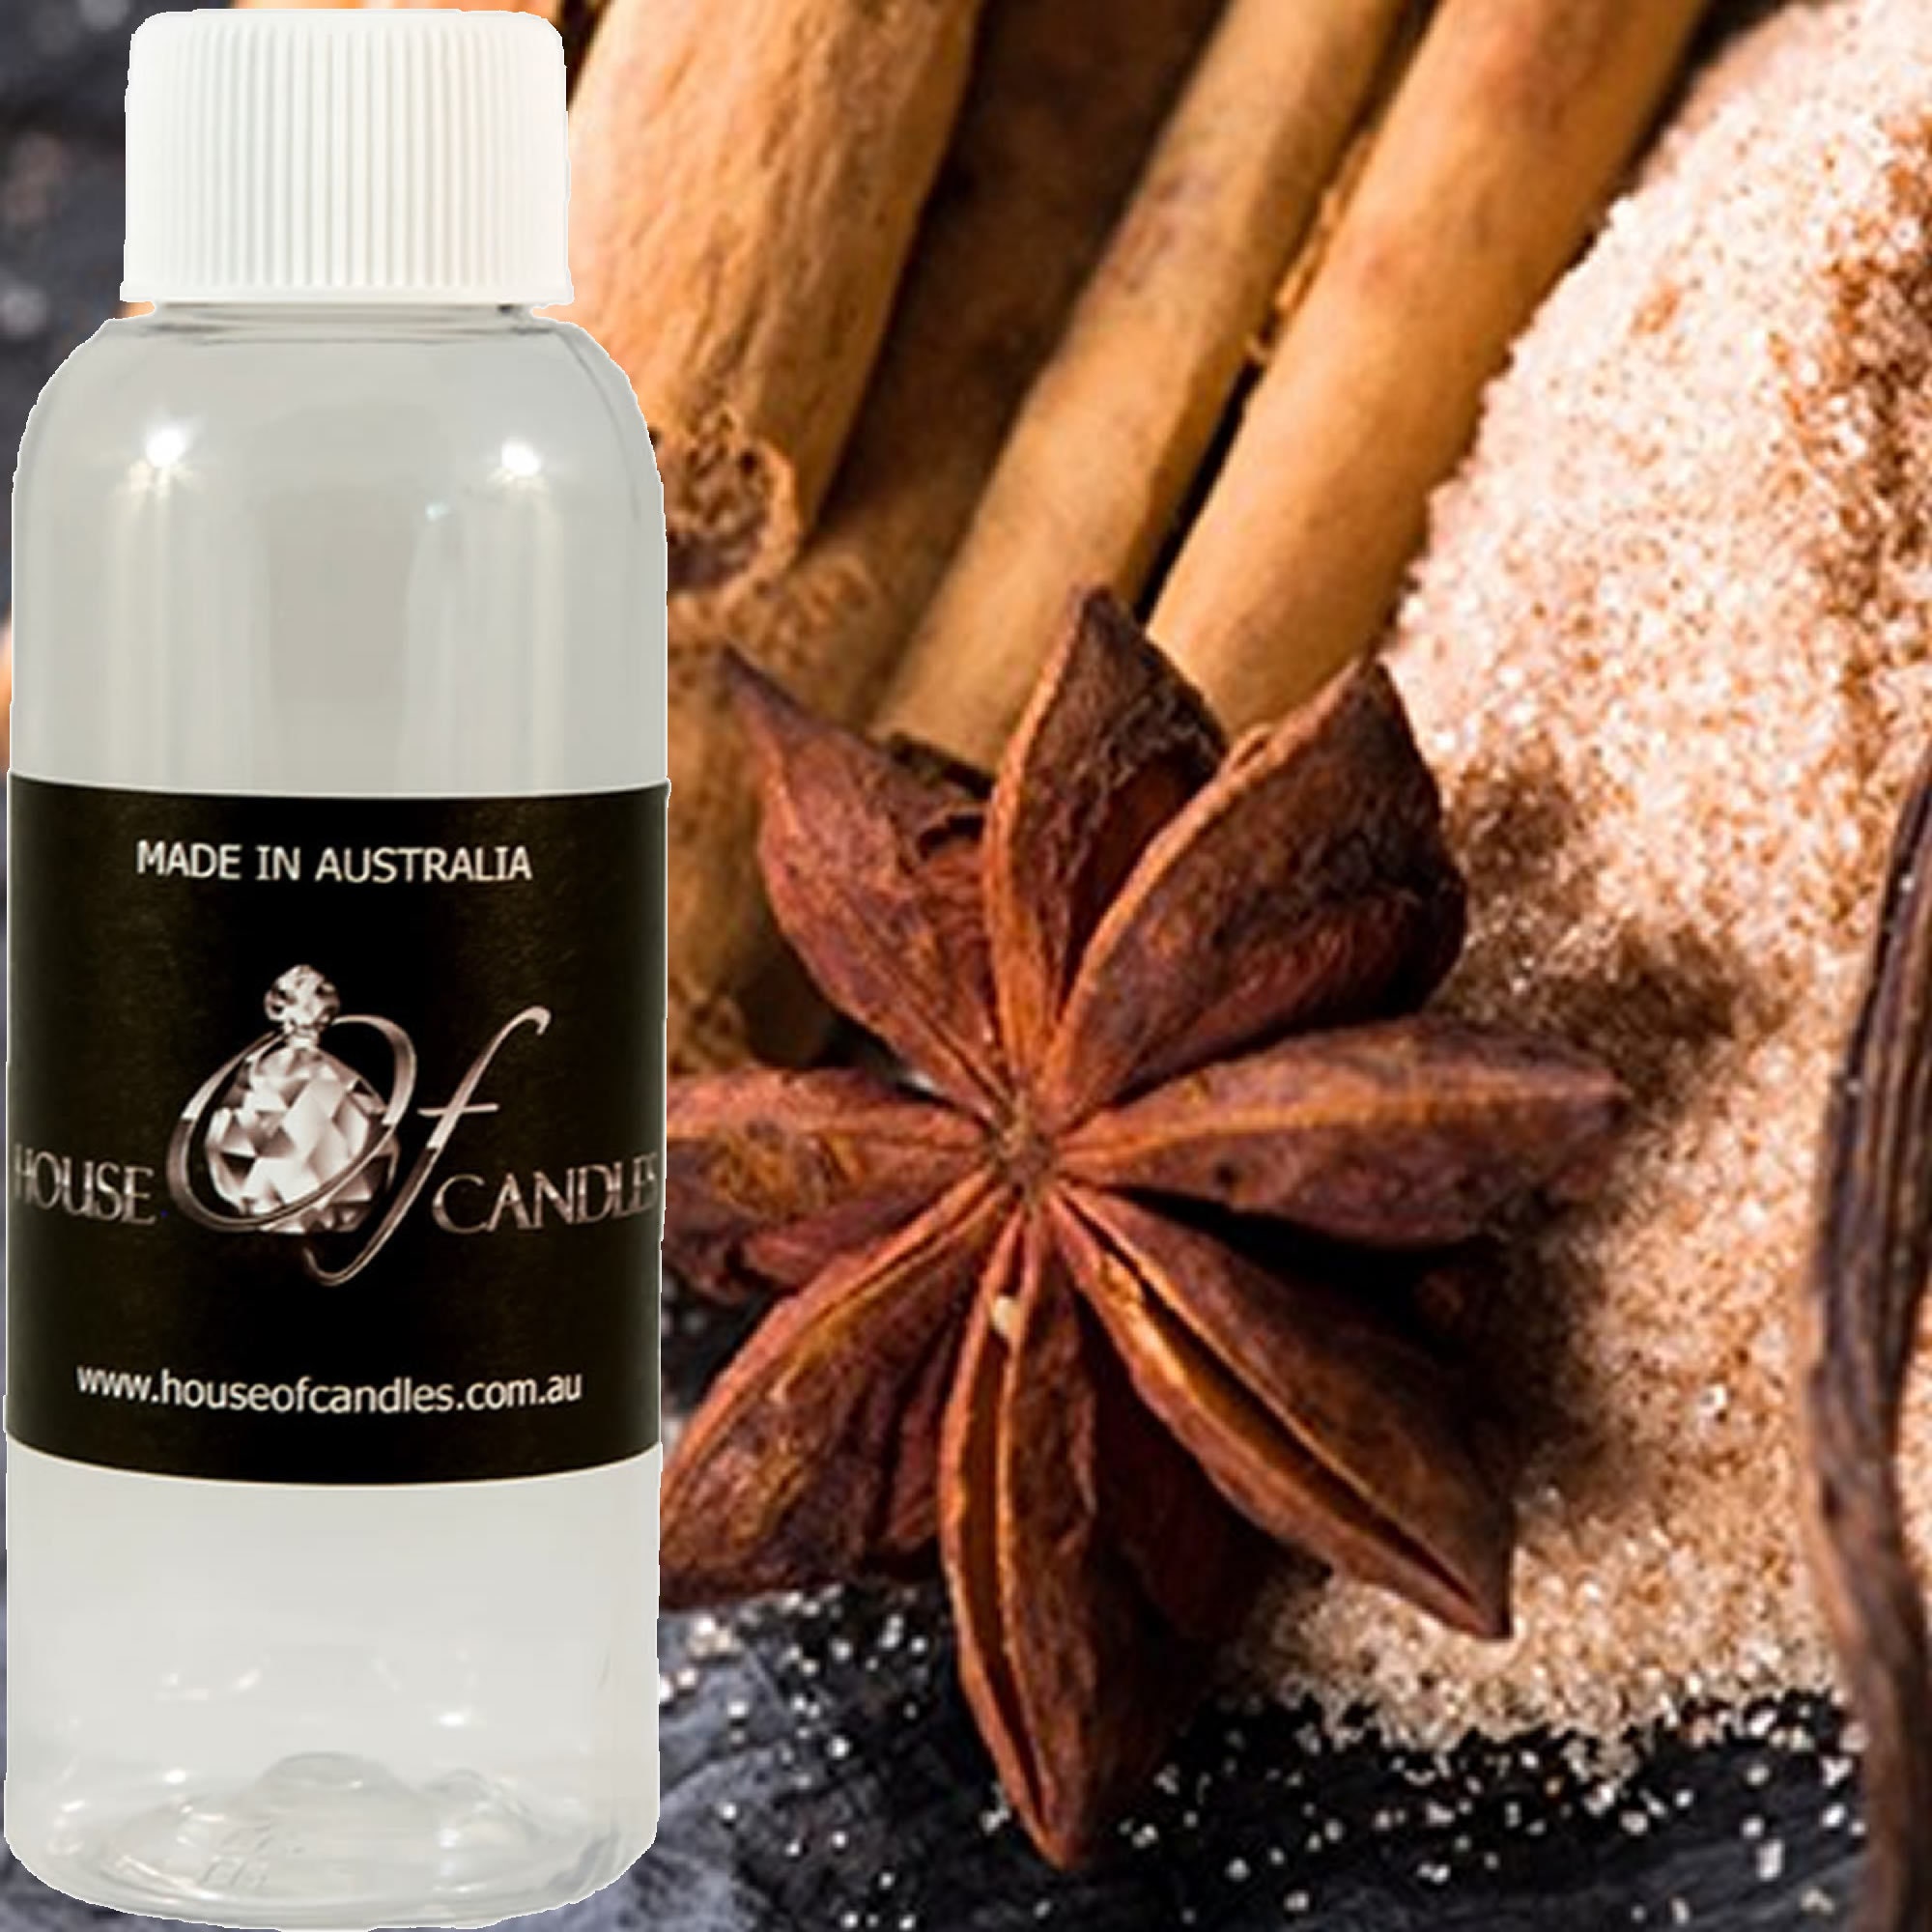 Almond Sugar Fragrance Oil Scented Oils For Body, Soap Making, Candle Making,  Lotion, Perfume, Diffuser BUY 4 GET 2 FREE